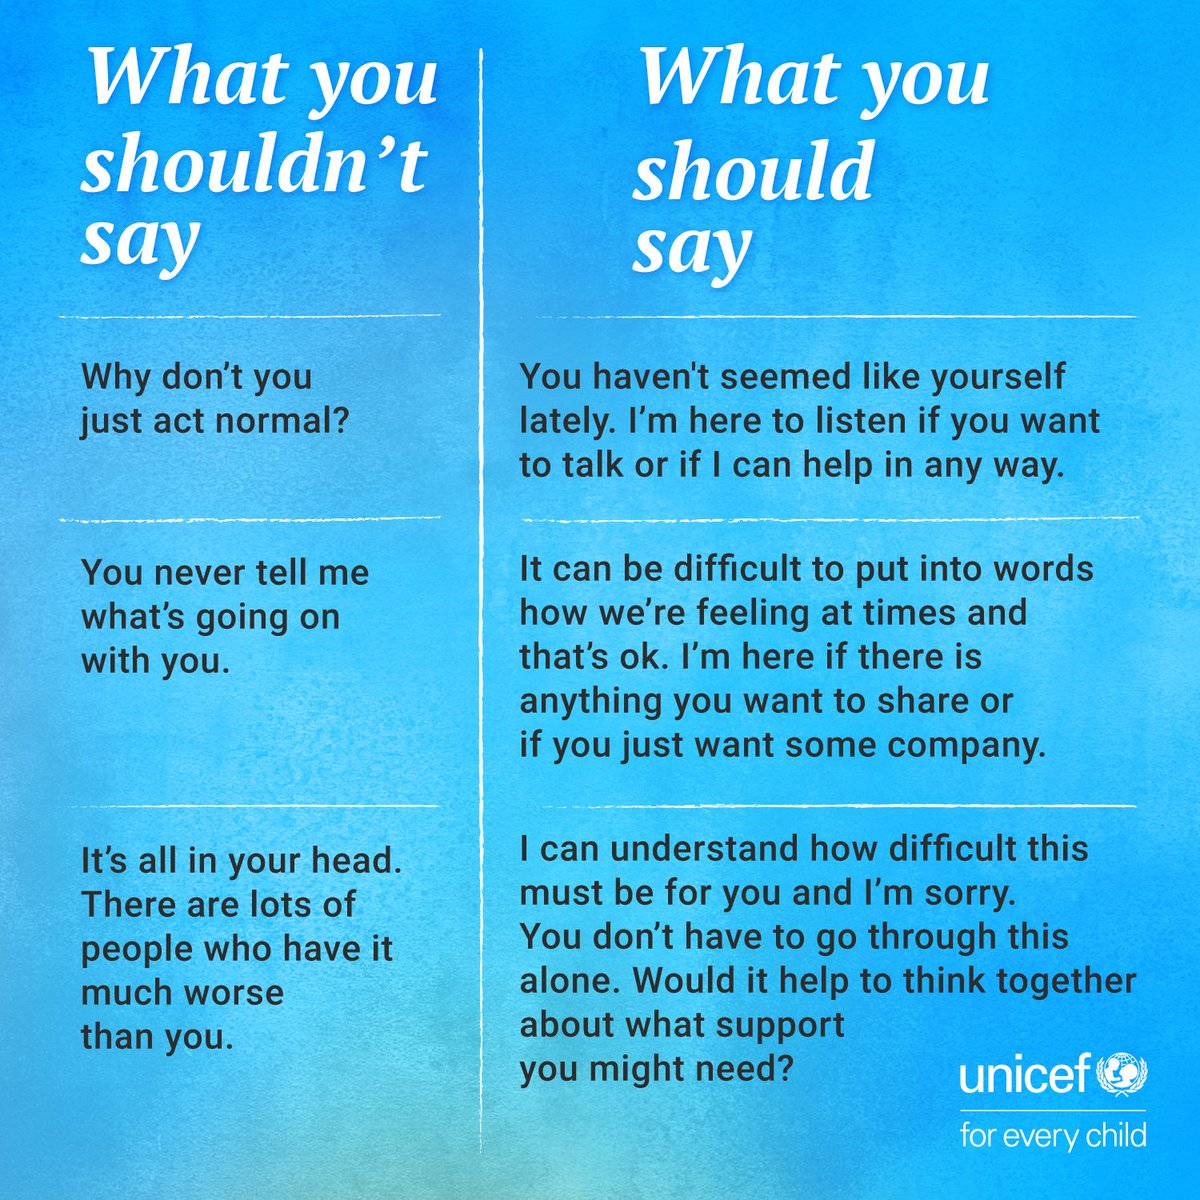 No one should have to deal with mental health challenges on their own. Yet, too many children & young people do. On Tuesday’s #WorldMentalHealthDay, @UNICEF has tips for parents & caregivers on how to start important conversations about mental health. unicef.org/parenting/ment…